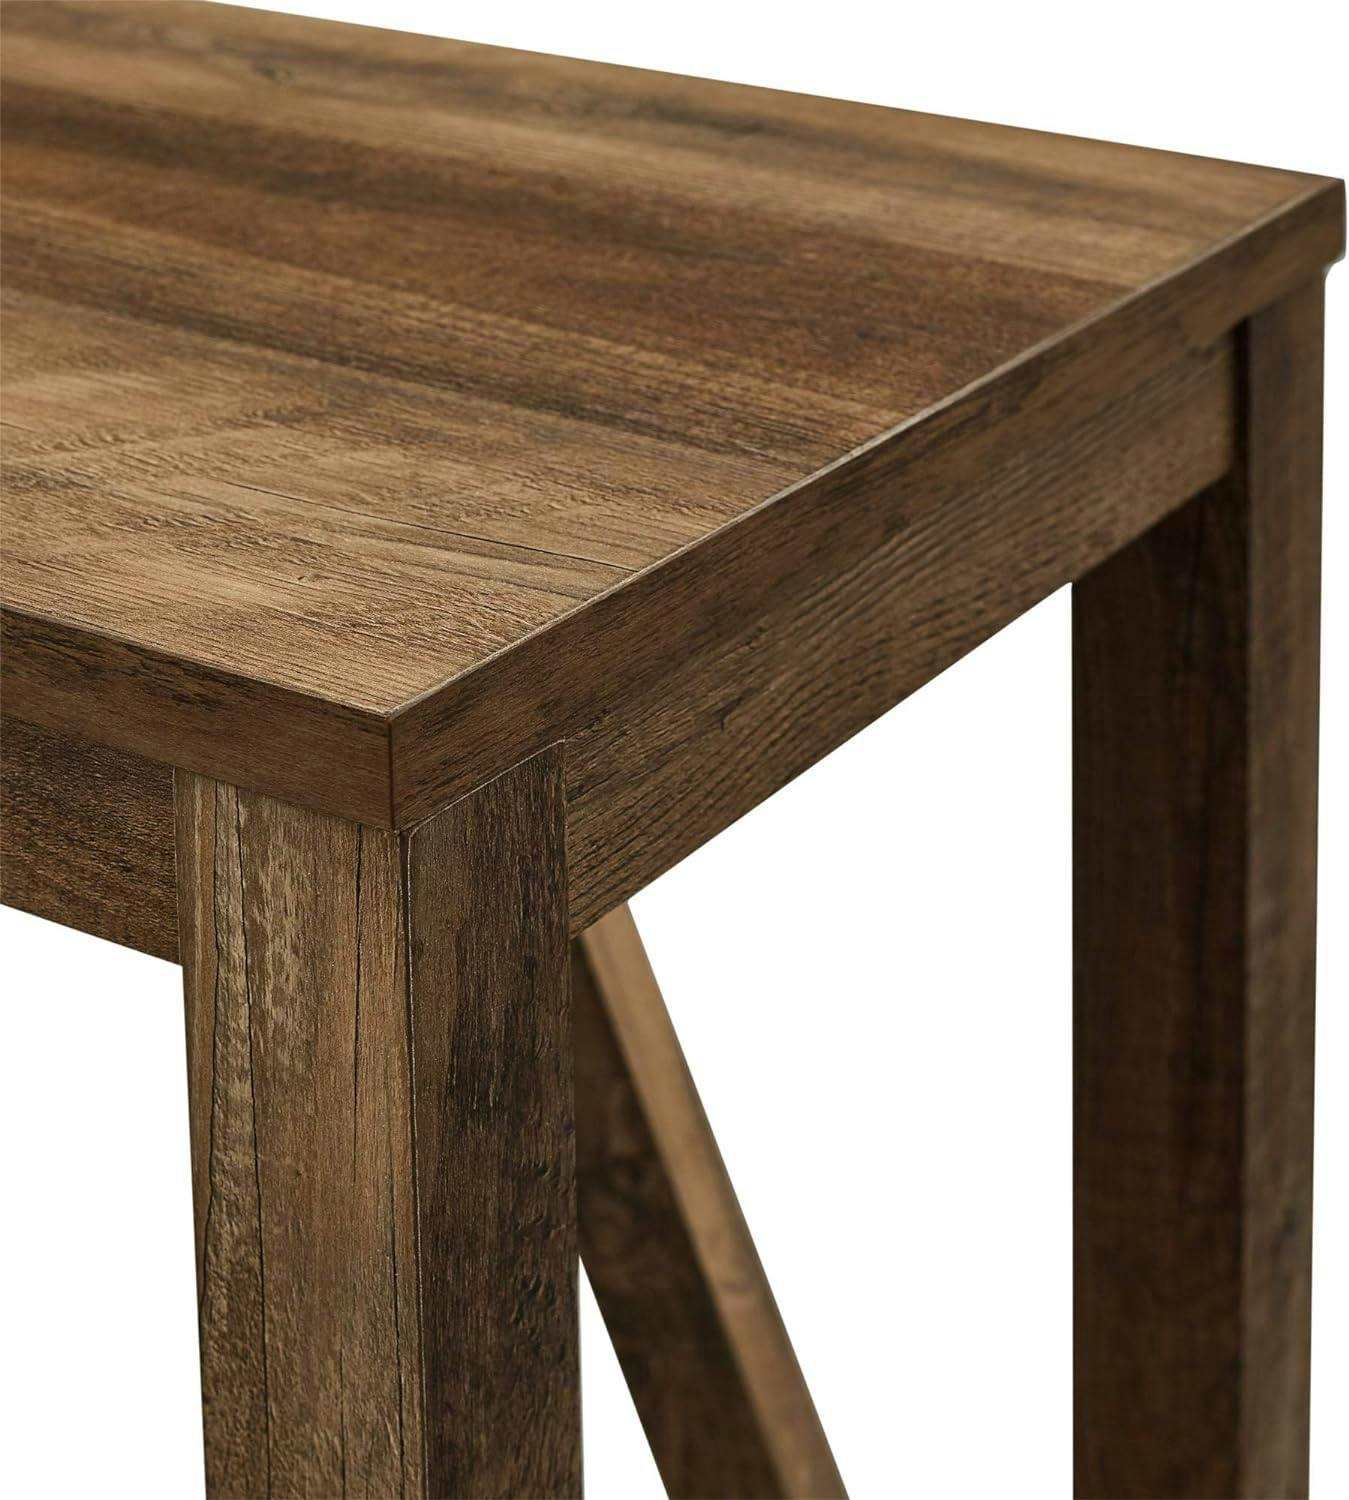 Rustic Oak A-Frame Rectangular End Table with Open Shelf